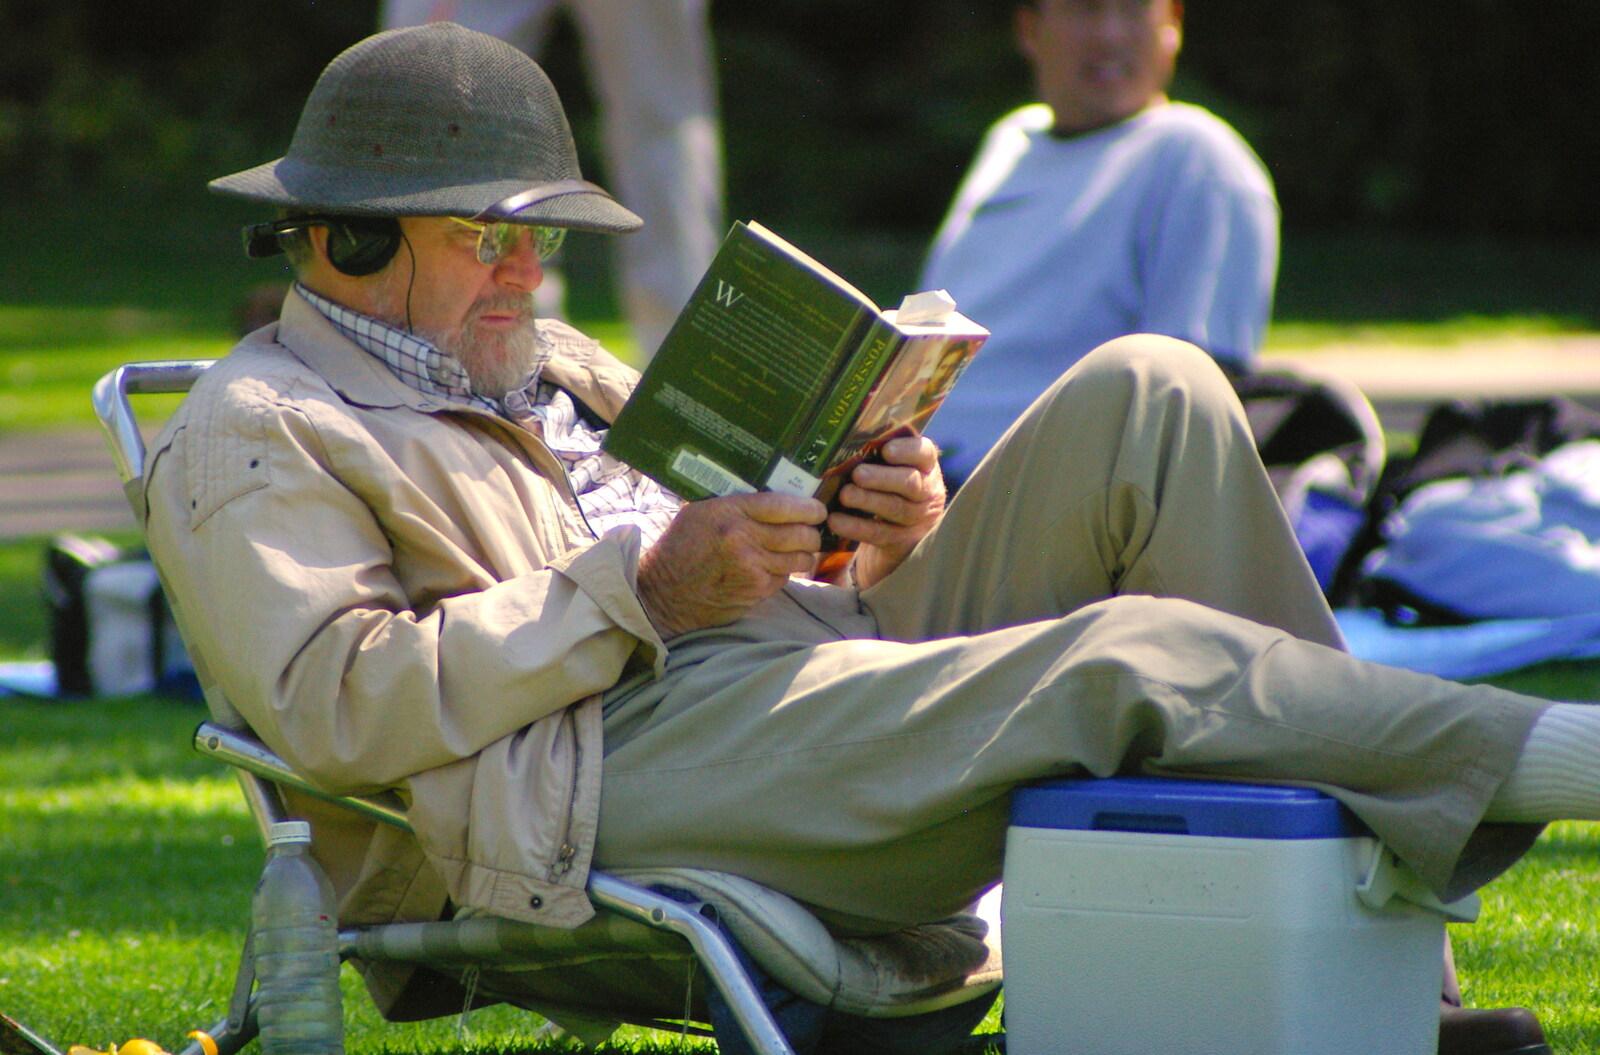 Scenes and People of Balboa Park, San Diego, California - 25th September 2005: Some dude reads a book